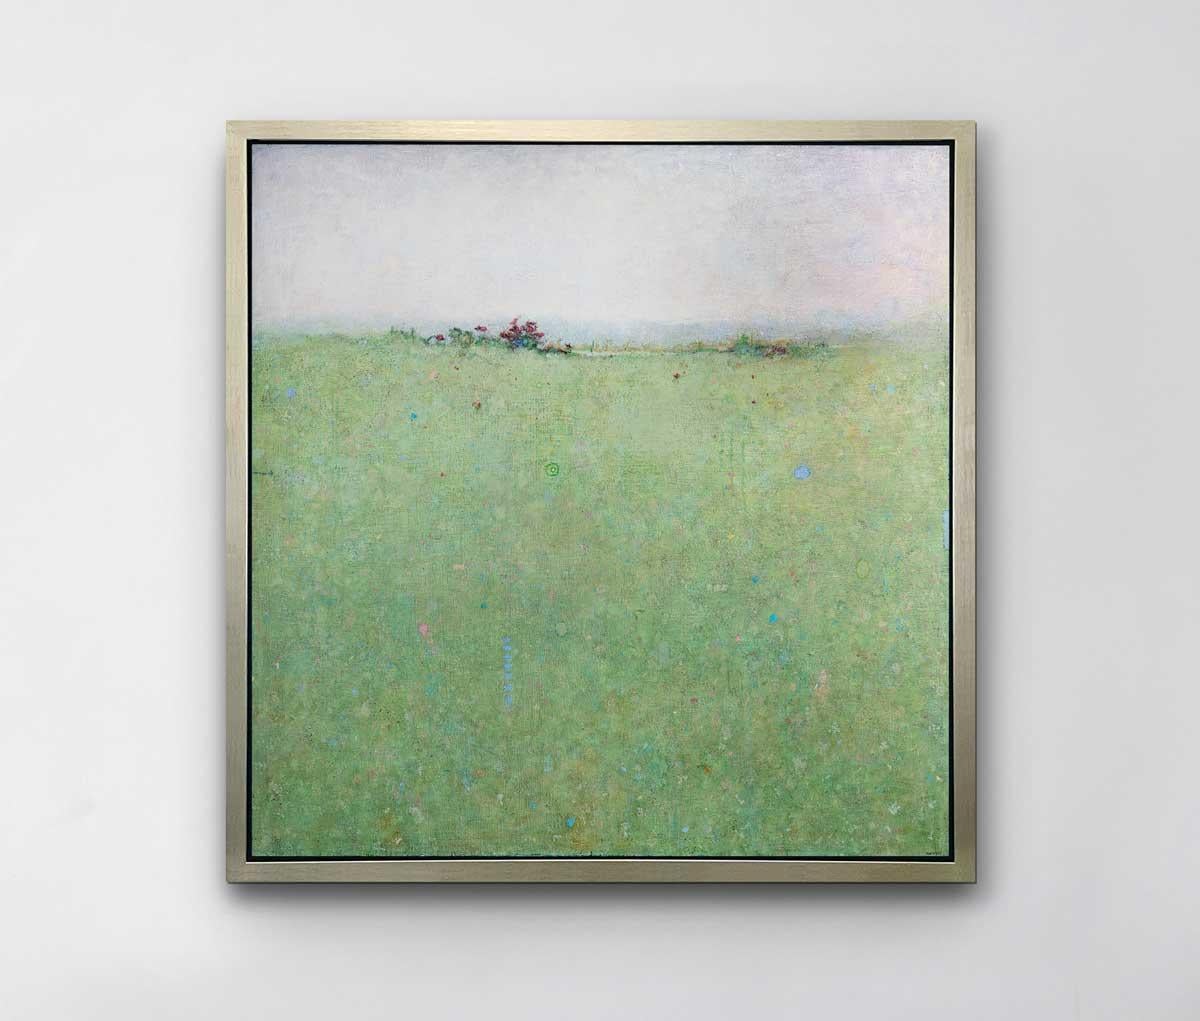 This limited edition print is an abstract landscape by Elwood Howell. It features a high, blurred horizon line, with green beneath it and light grey above it. The green area is spattered with small specs of bright color like blue and pink. A cluster